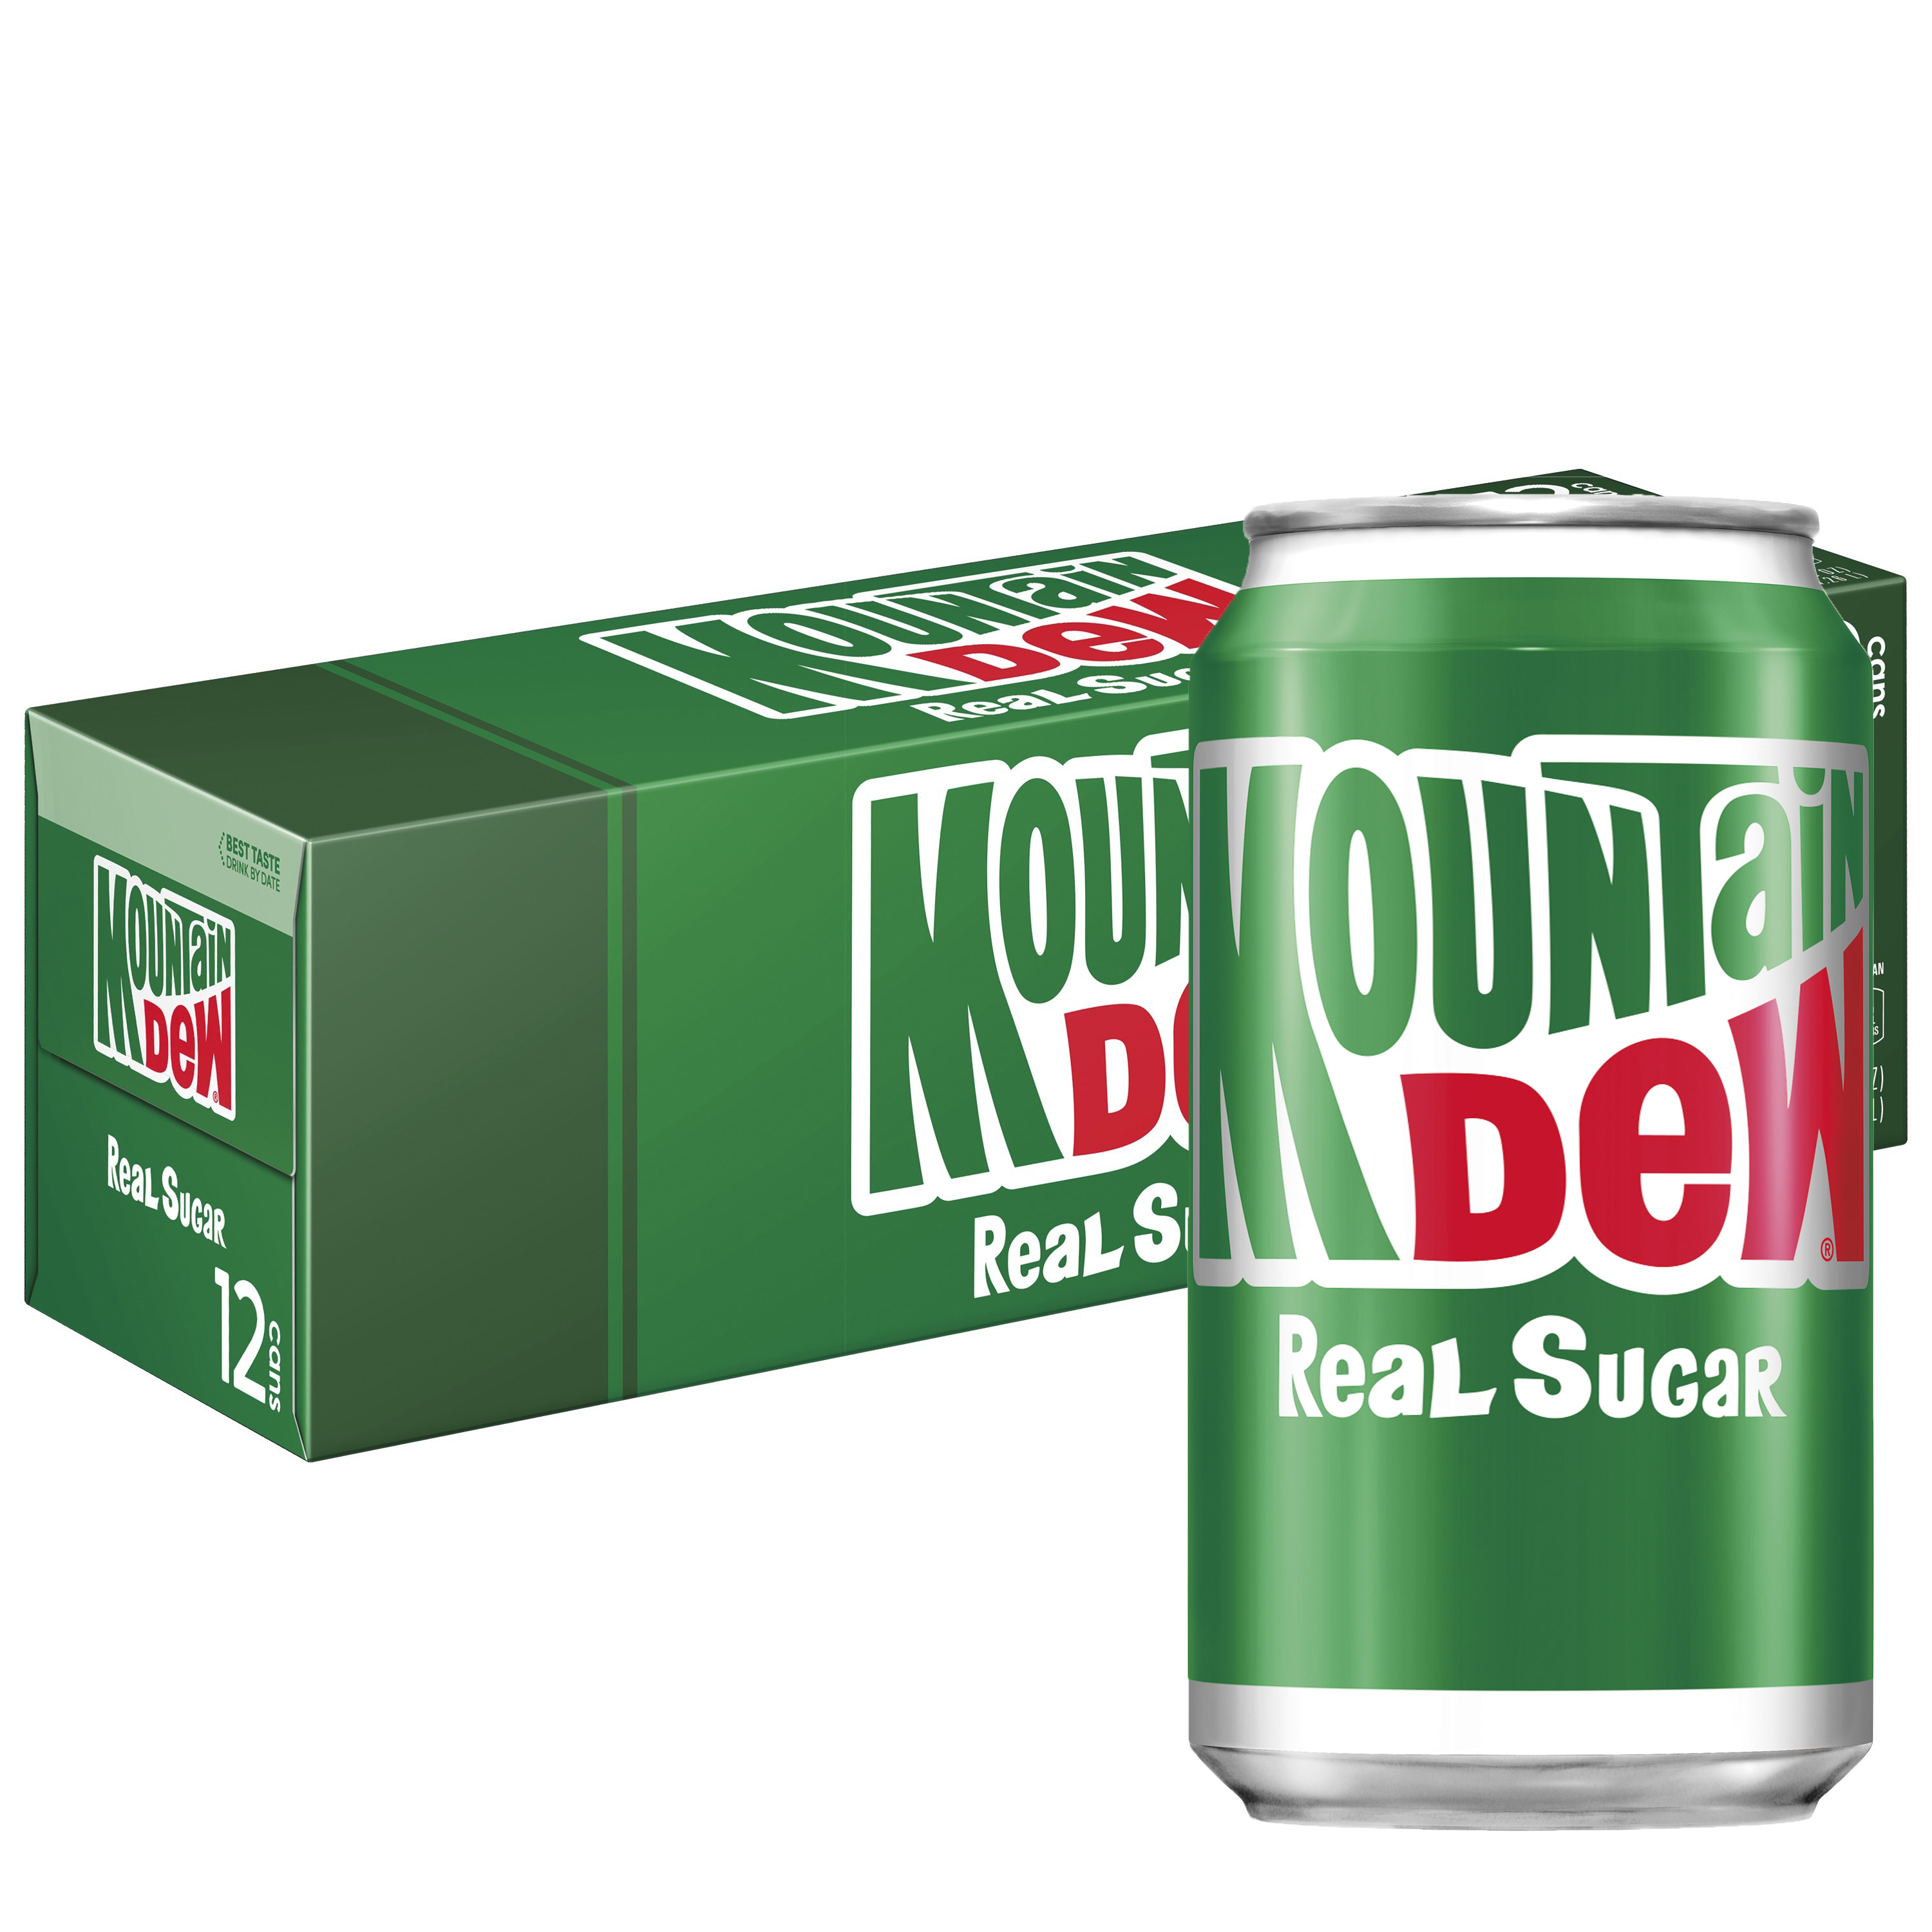 Mountain Dew Throwback with Real Sugar Soda Pop, 12 fl oz, 12 Pack Cans - image 1 of 5